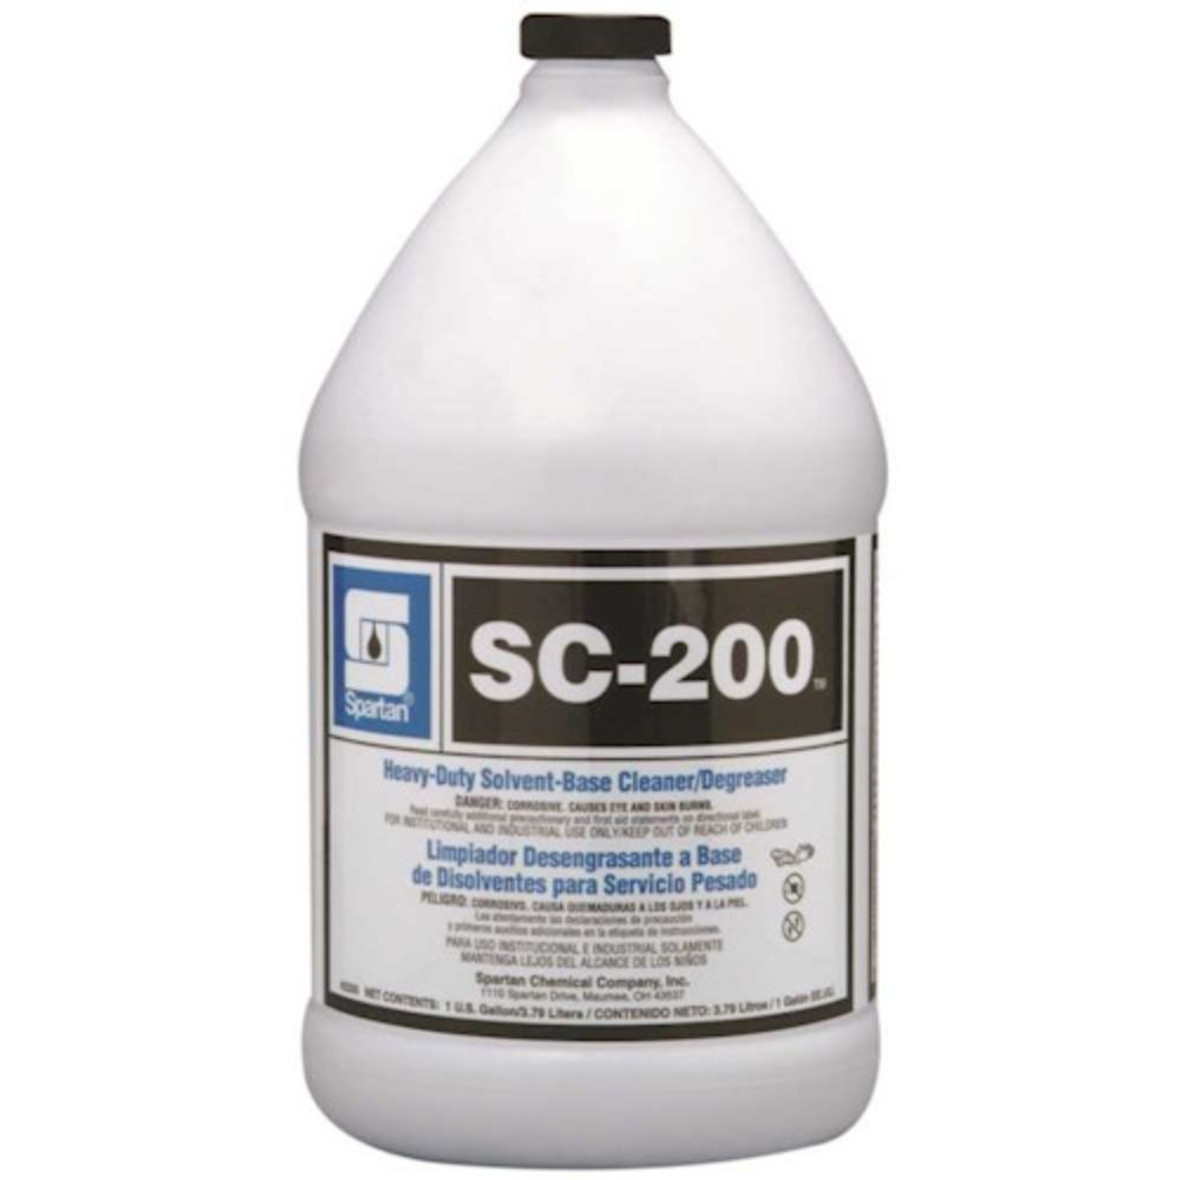 Spartan SC-200 Heavy Duty Solvent Base Industrial Degreaser, Cleaner